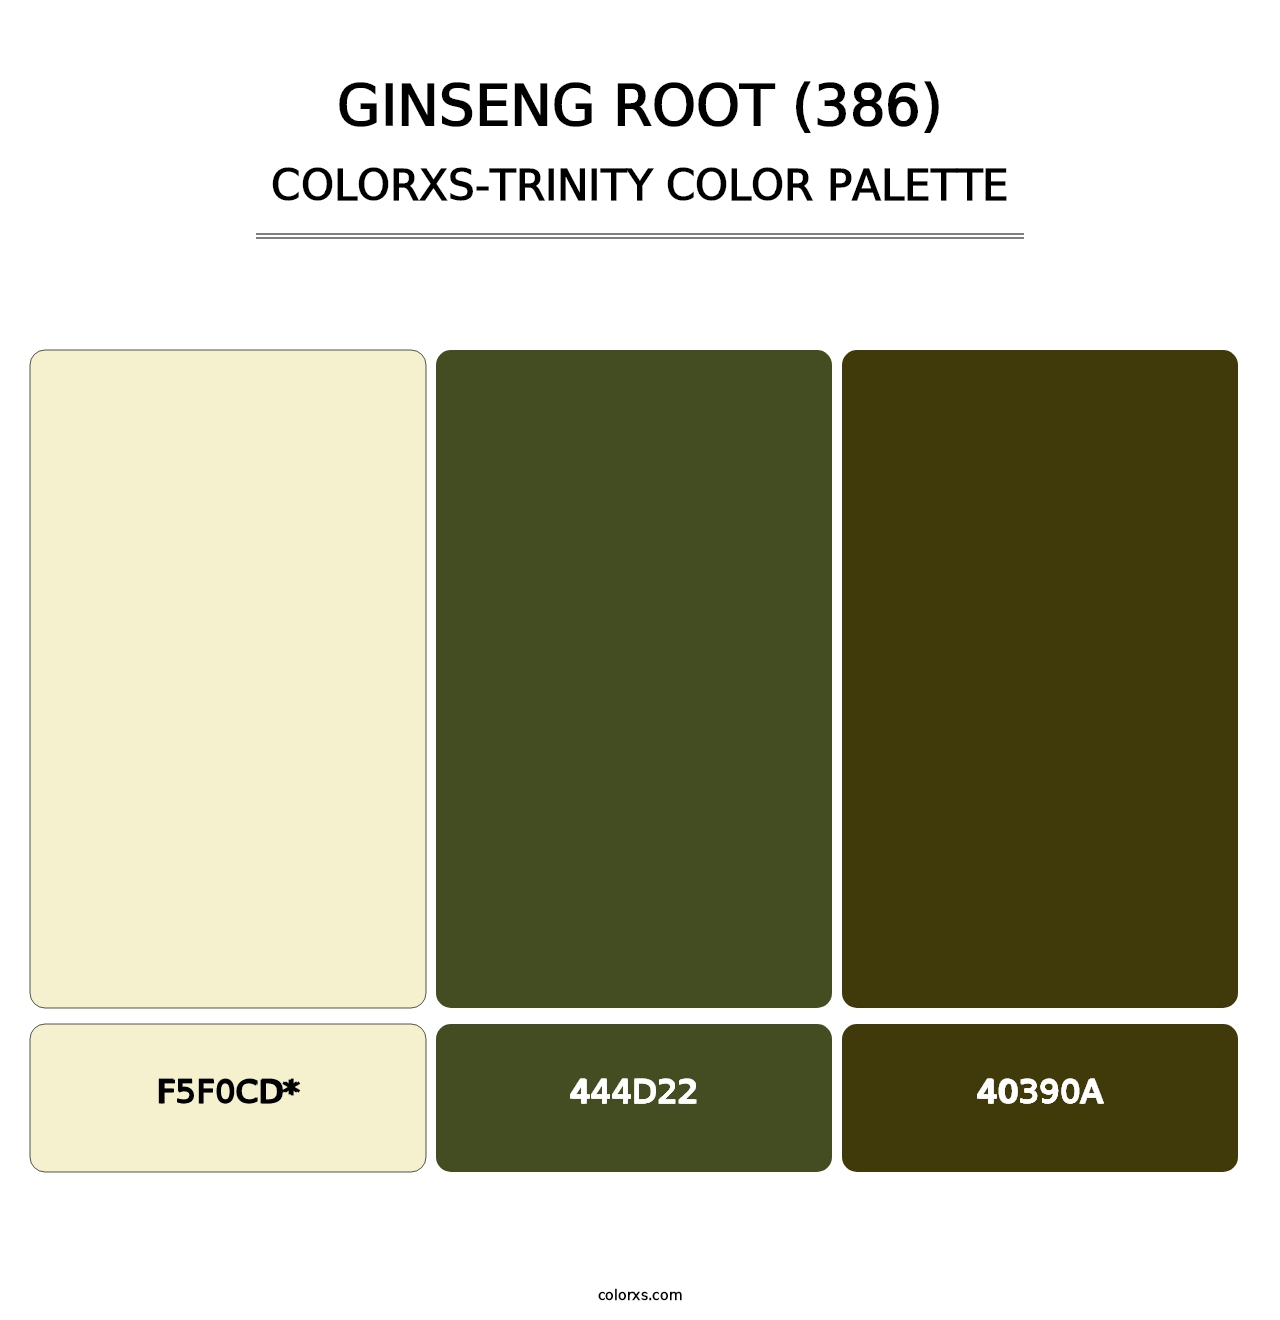 Ginseng Root (386) - Colorxs Trinity Palette